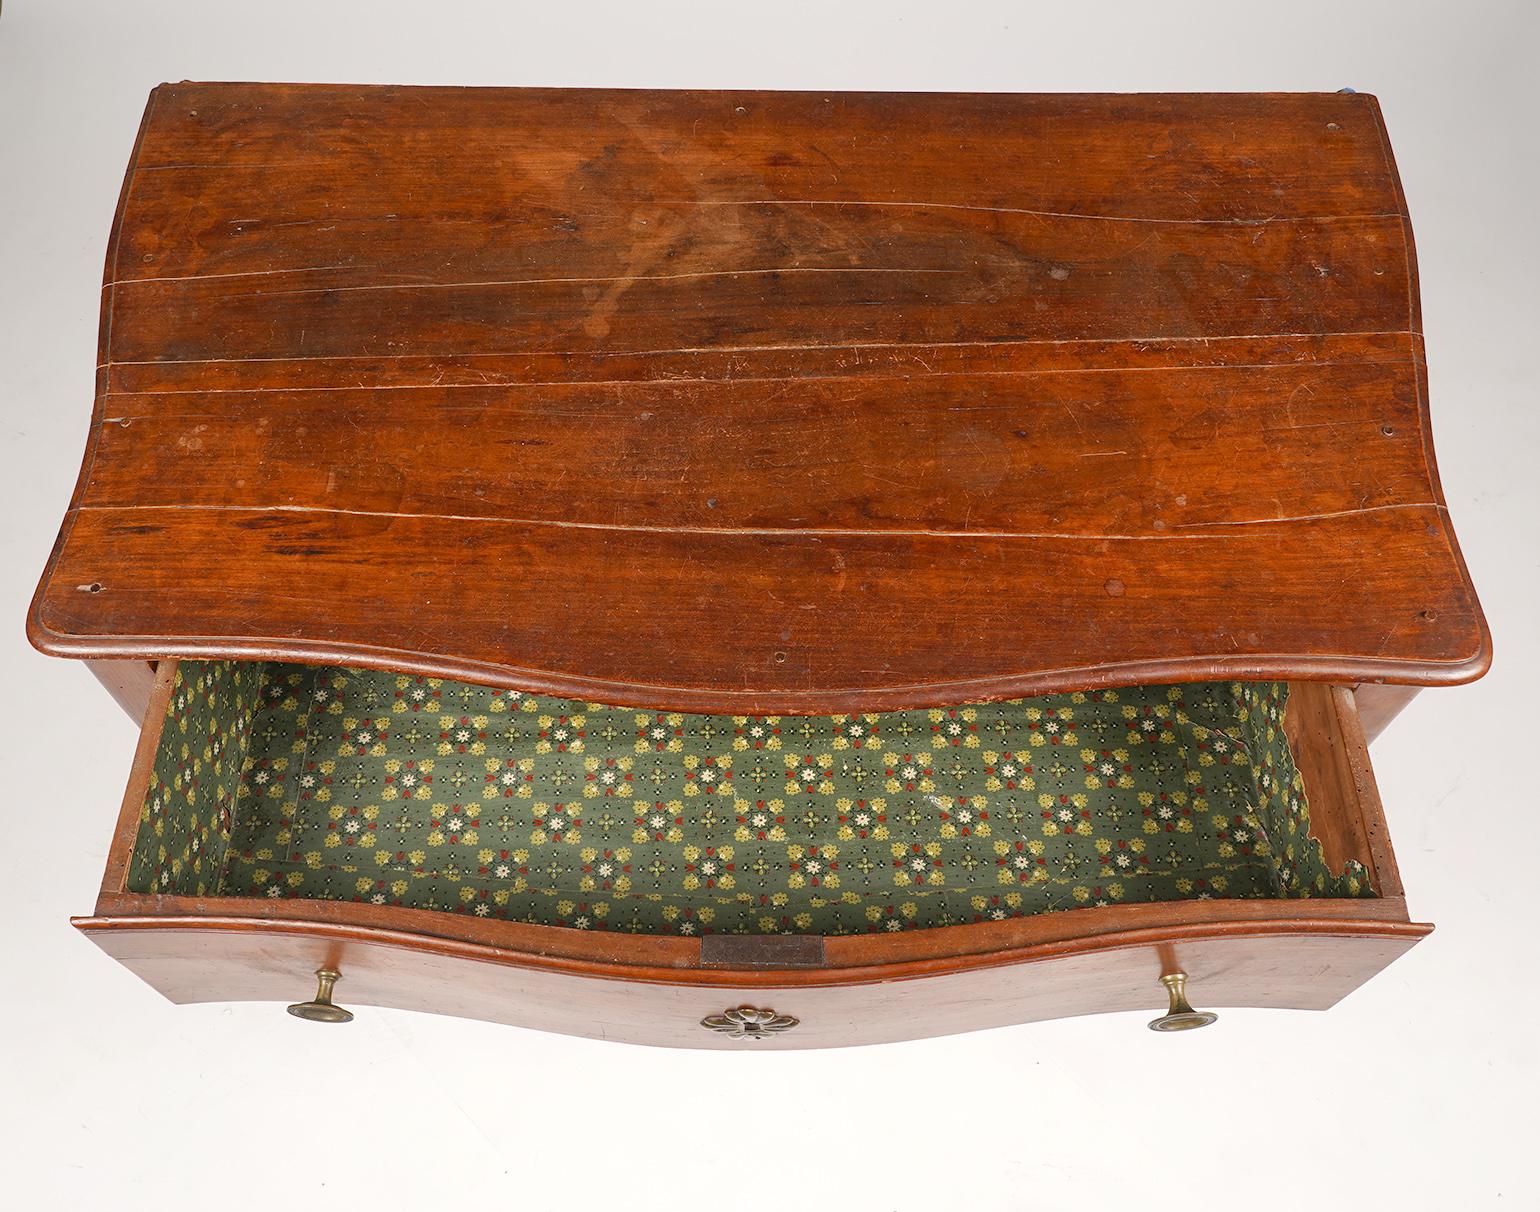 Dating to the late 18th century this French Provincial Cherry commode features serpentine front and sides, one deep drawer, carved shaped aprons and cabriole legs with stylized hoof feet. The cherry wood has through centuries obtained an attractive